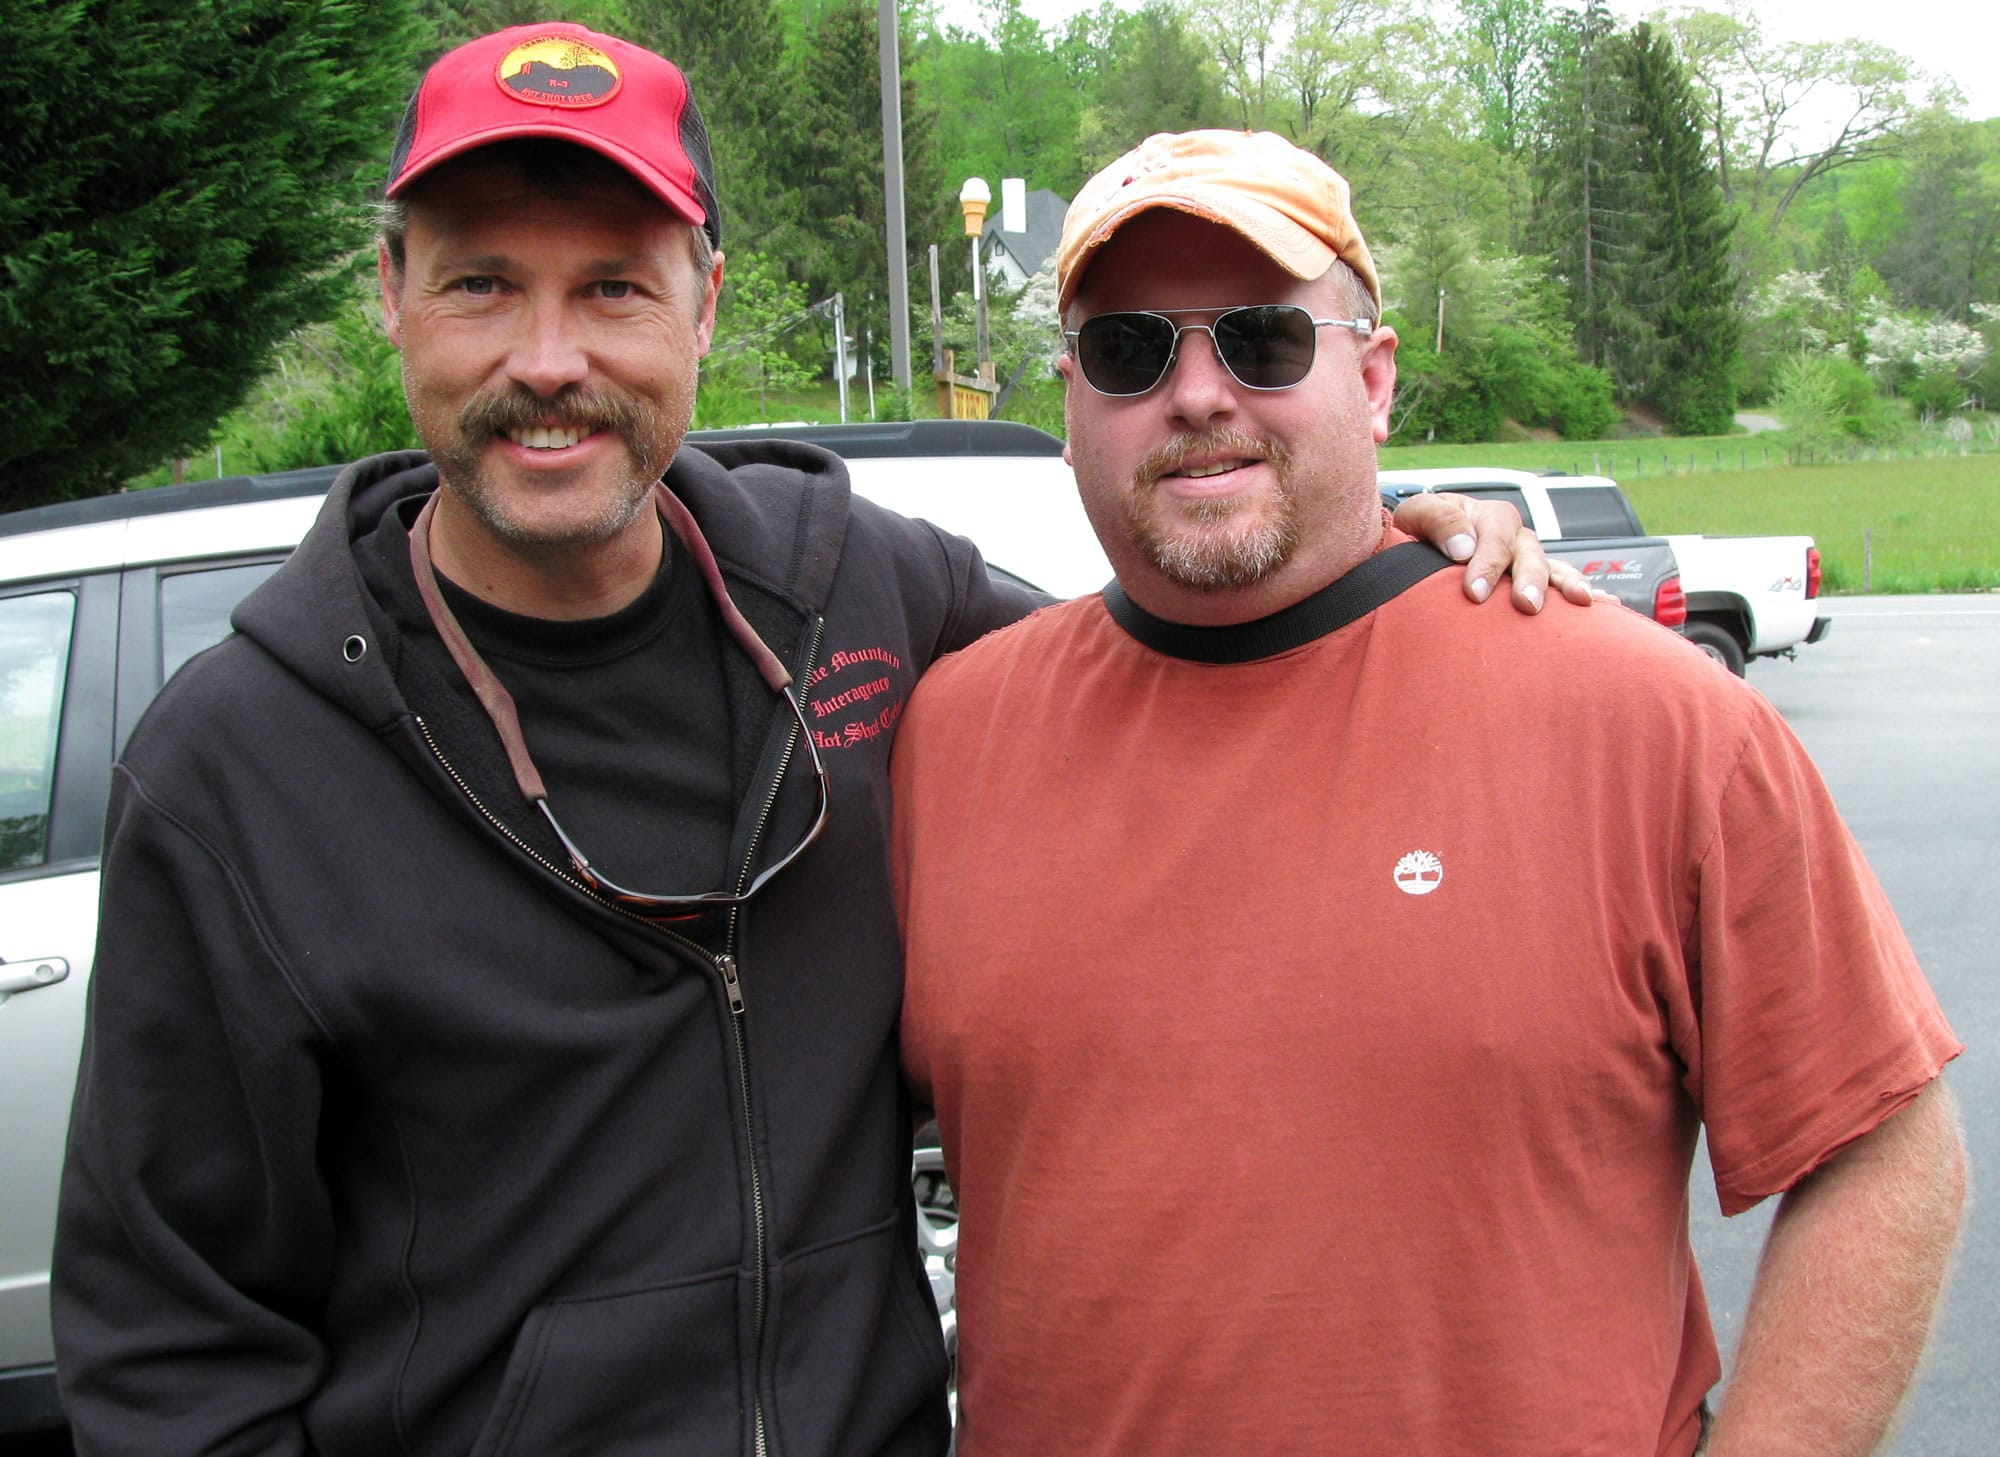 Eric Marsh, left, superintendent of the Granite Mountain Hotshots, during a visit with his cousin, Scott Marsh, in North Carolina.